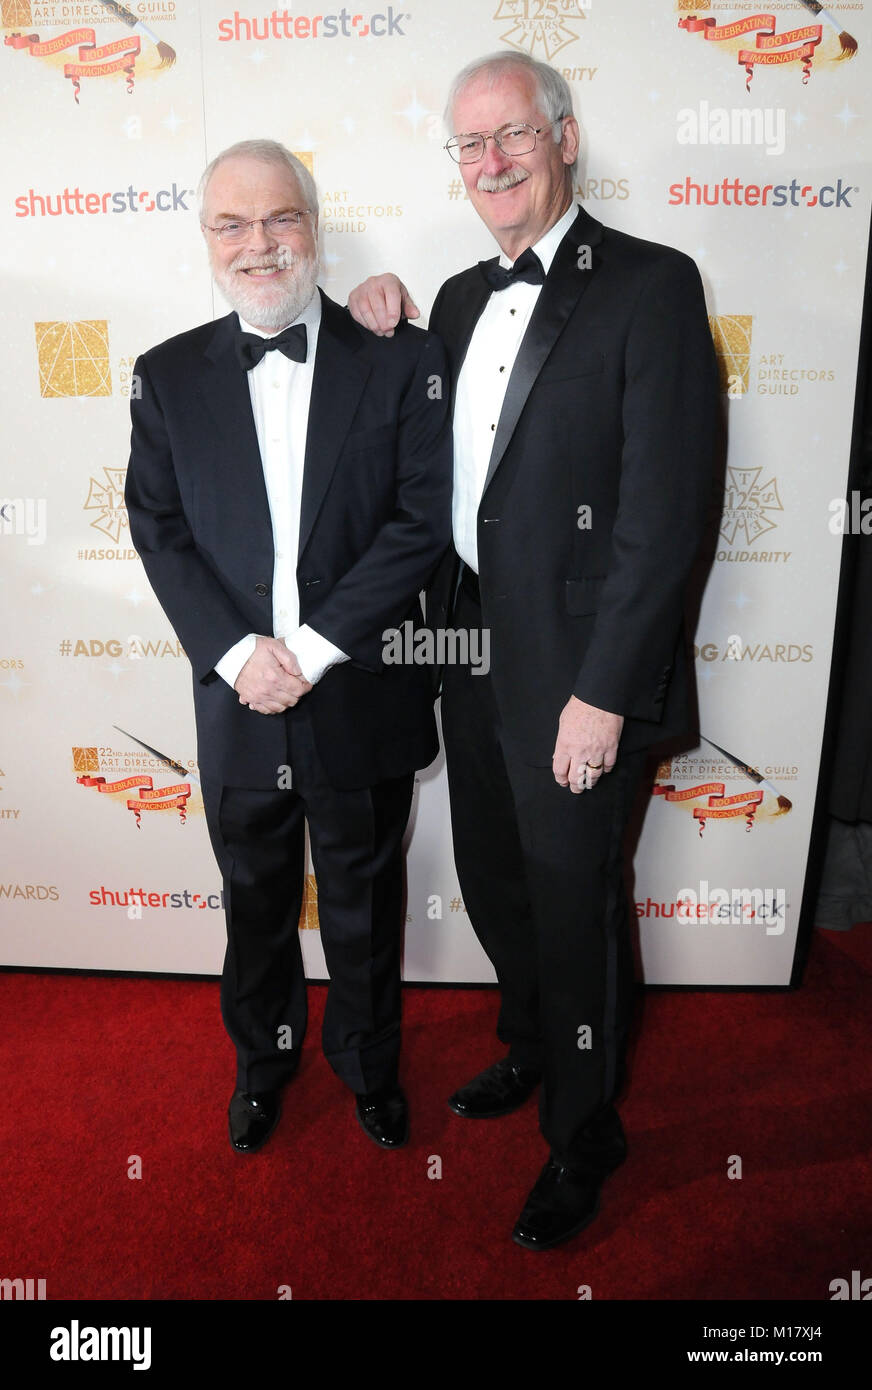 Hollywood, California, USA. 27th January 2018.(L-R) Production designers Ron Clements and John Musker attend Art Directors Guild 22nd Annual Excellence in Production Design Awards at the Dolby Theatre on January 27, 2018 in Hollywood, California. Photo by Barry King/Alamy Live News Stock Photo